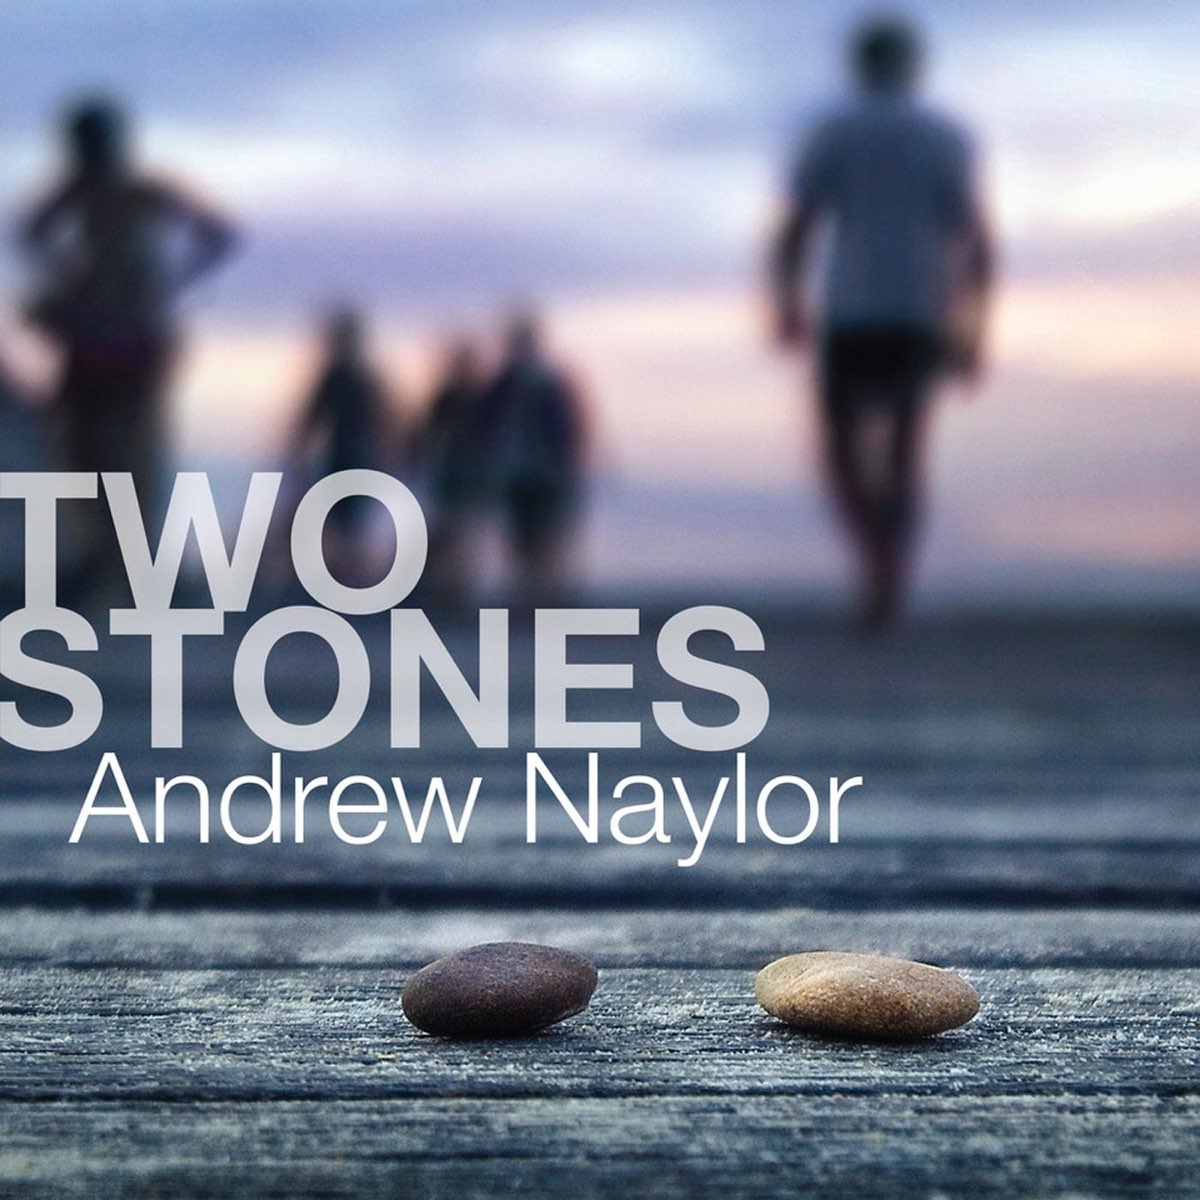 Andre stone. Нейлор 2. Helen Naylor "two Lives". Andy Stone. Two Stones Fall and Hit a person.